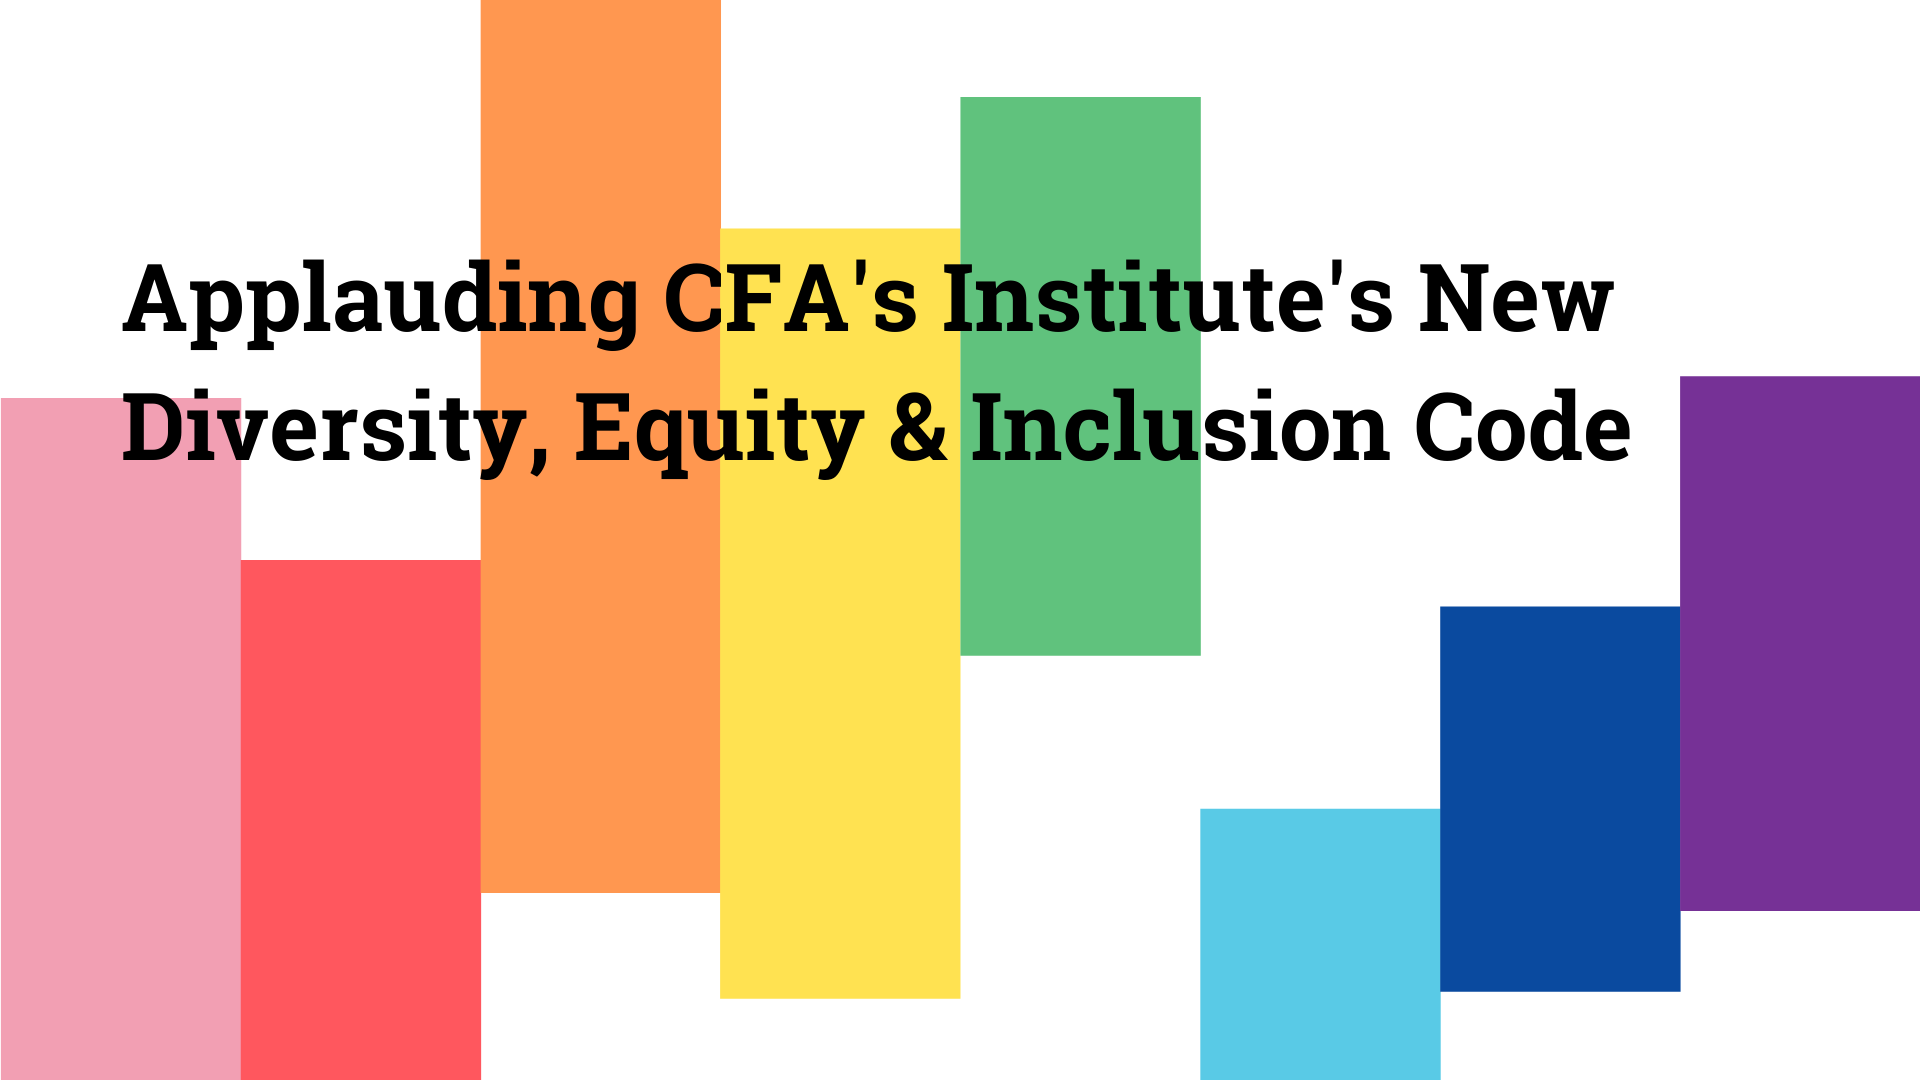 Applauding the CFA Institute’s New Diversity, Equity and Inclusion (DEI) Code